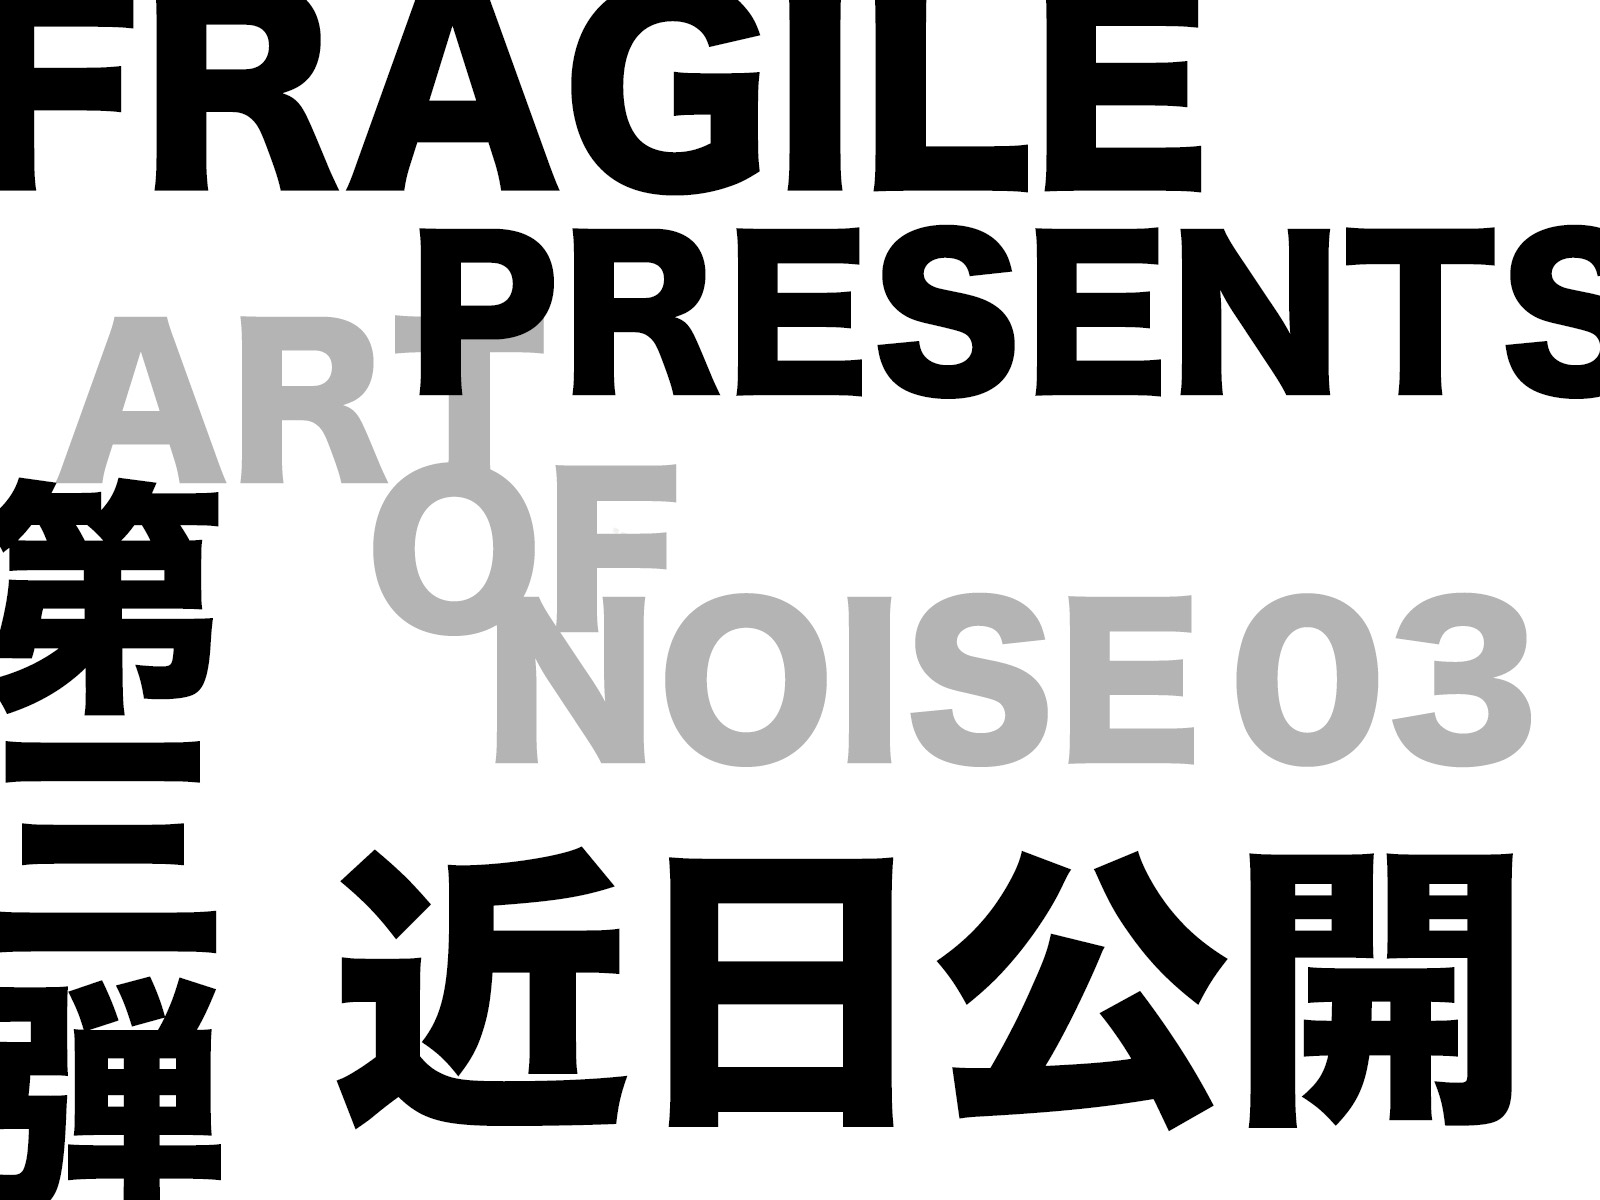 FRAGILE PRESENTS ART OF NOISE 03 coming soon…